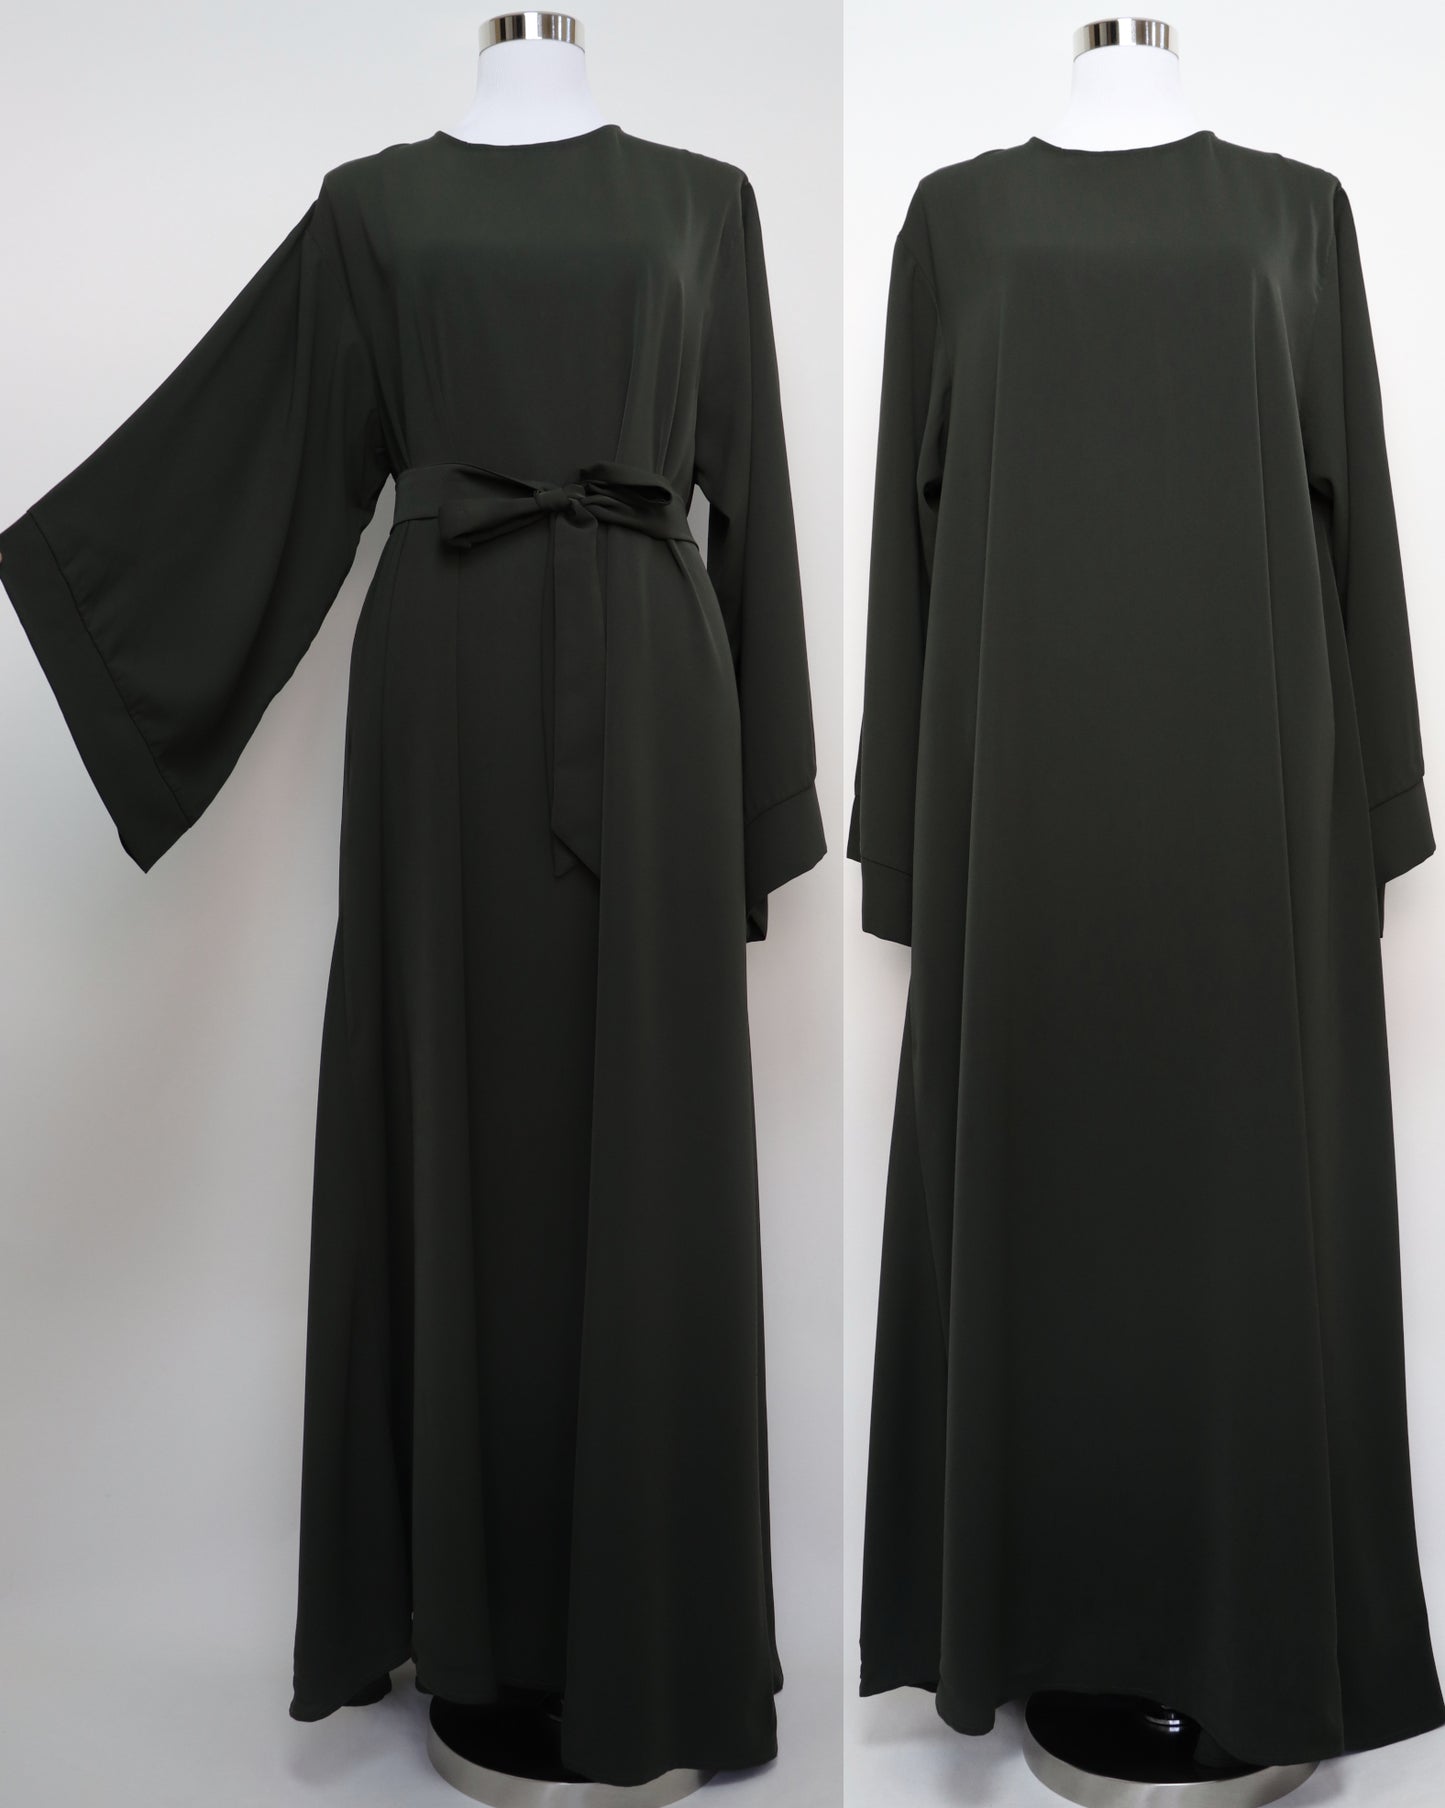 Classic Closed Flare Abaya Wide Sleeves - Deep Olive